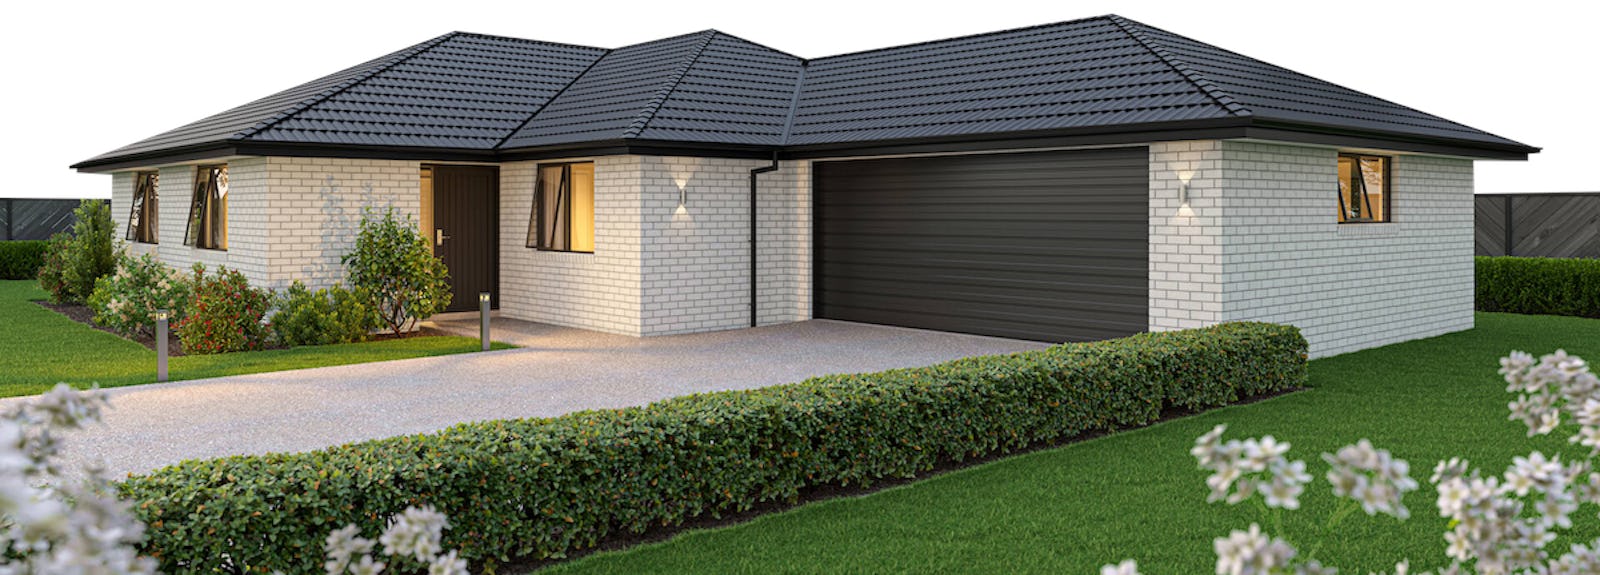 Two bedroom house plans can offer enough space for a home office, guest room, children’s playroom and more, ideal  for a range of lifestyles. 